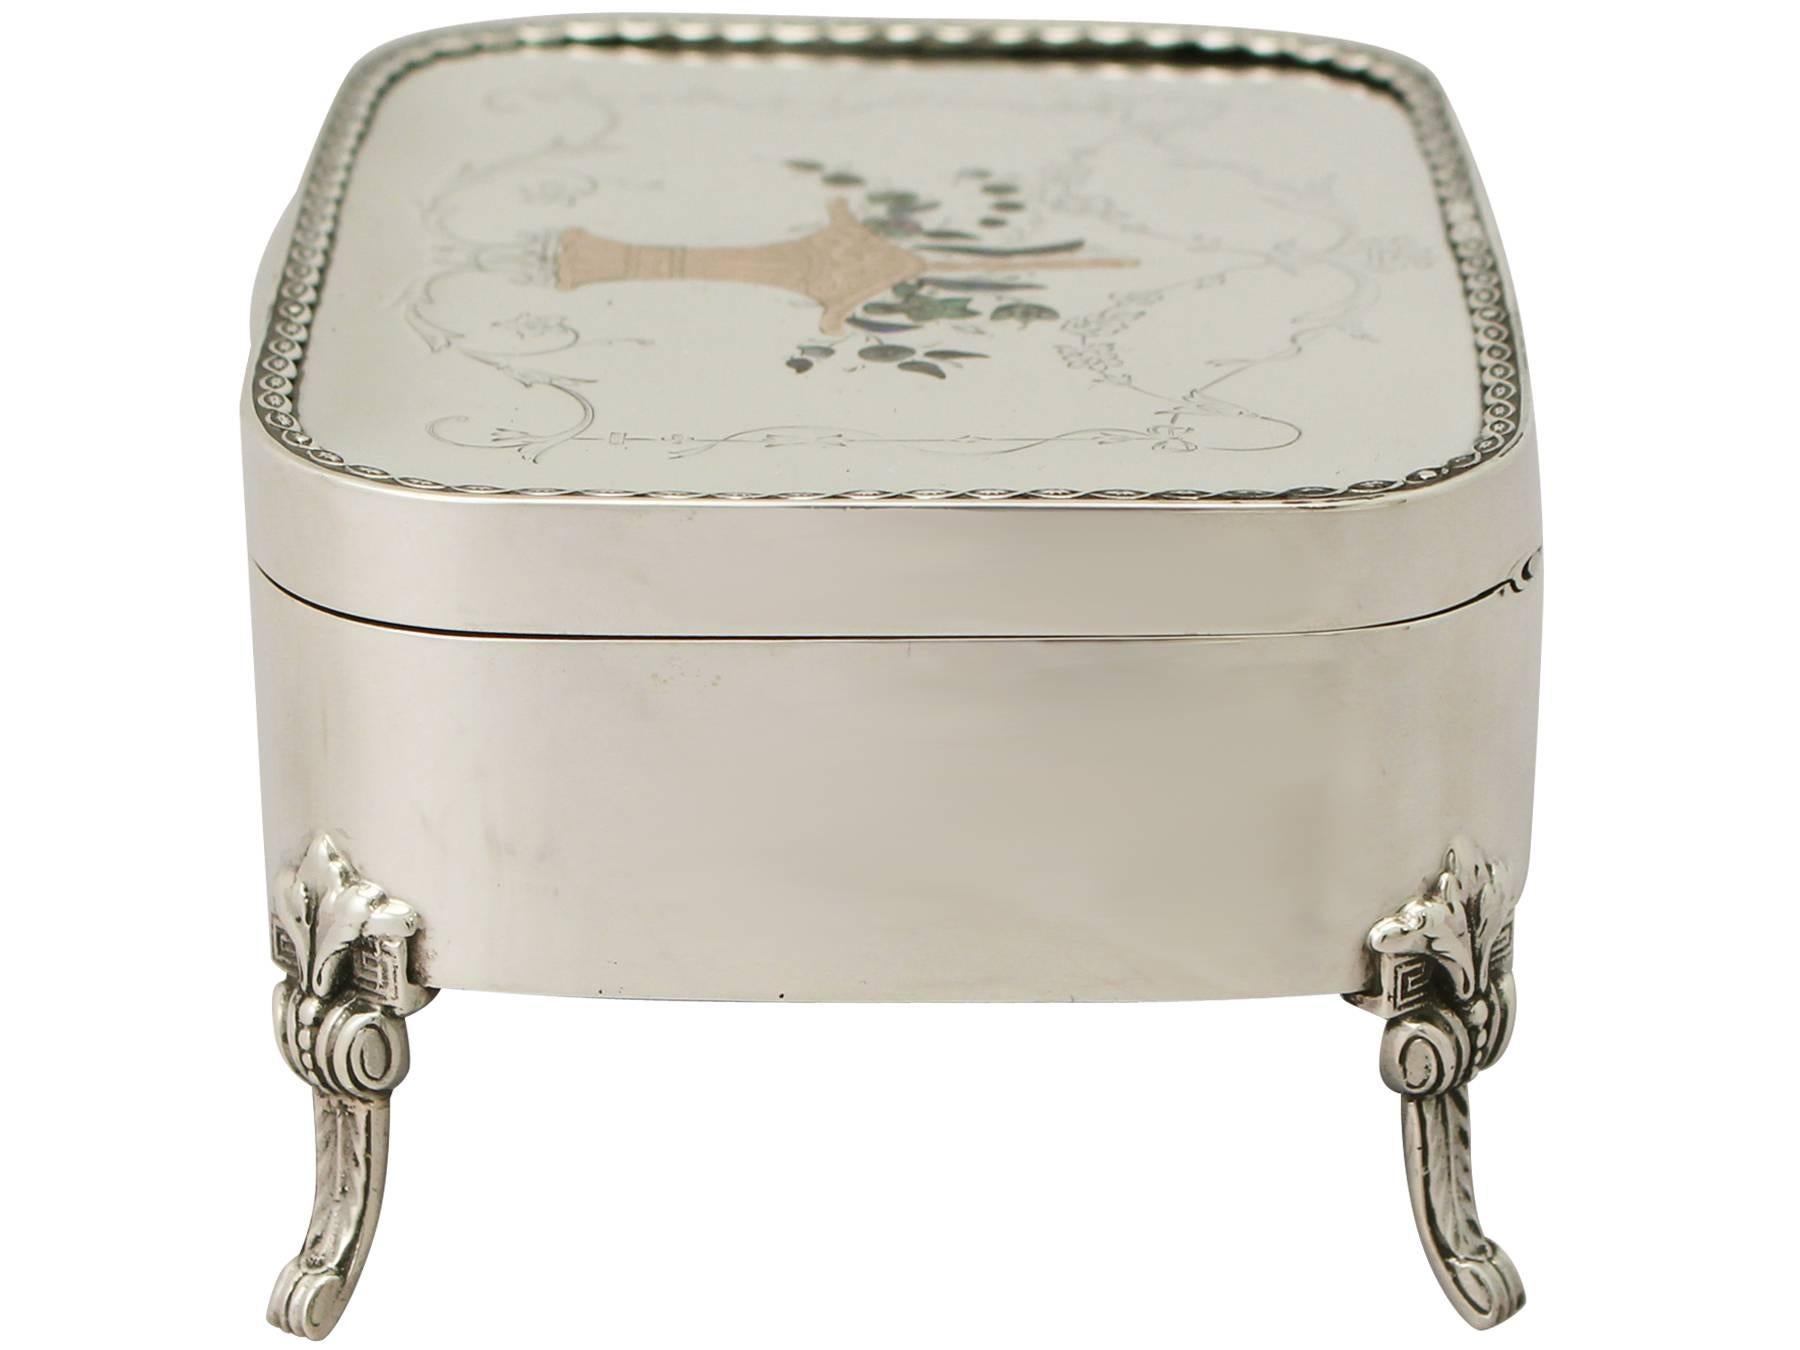 An exceptional, fine and impressive, antique Edwardian English sterling silver jewelry box; an addition to our ornamental silverware collection.

This exceptional antique Edwardian sterling silver jewelry box has a plain rectangular form with